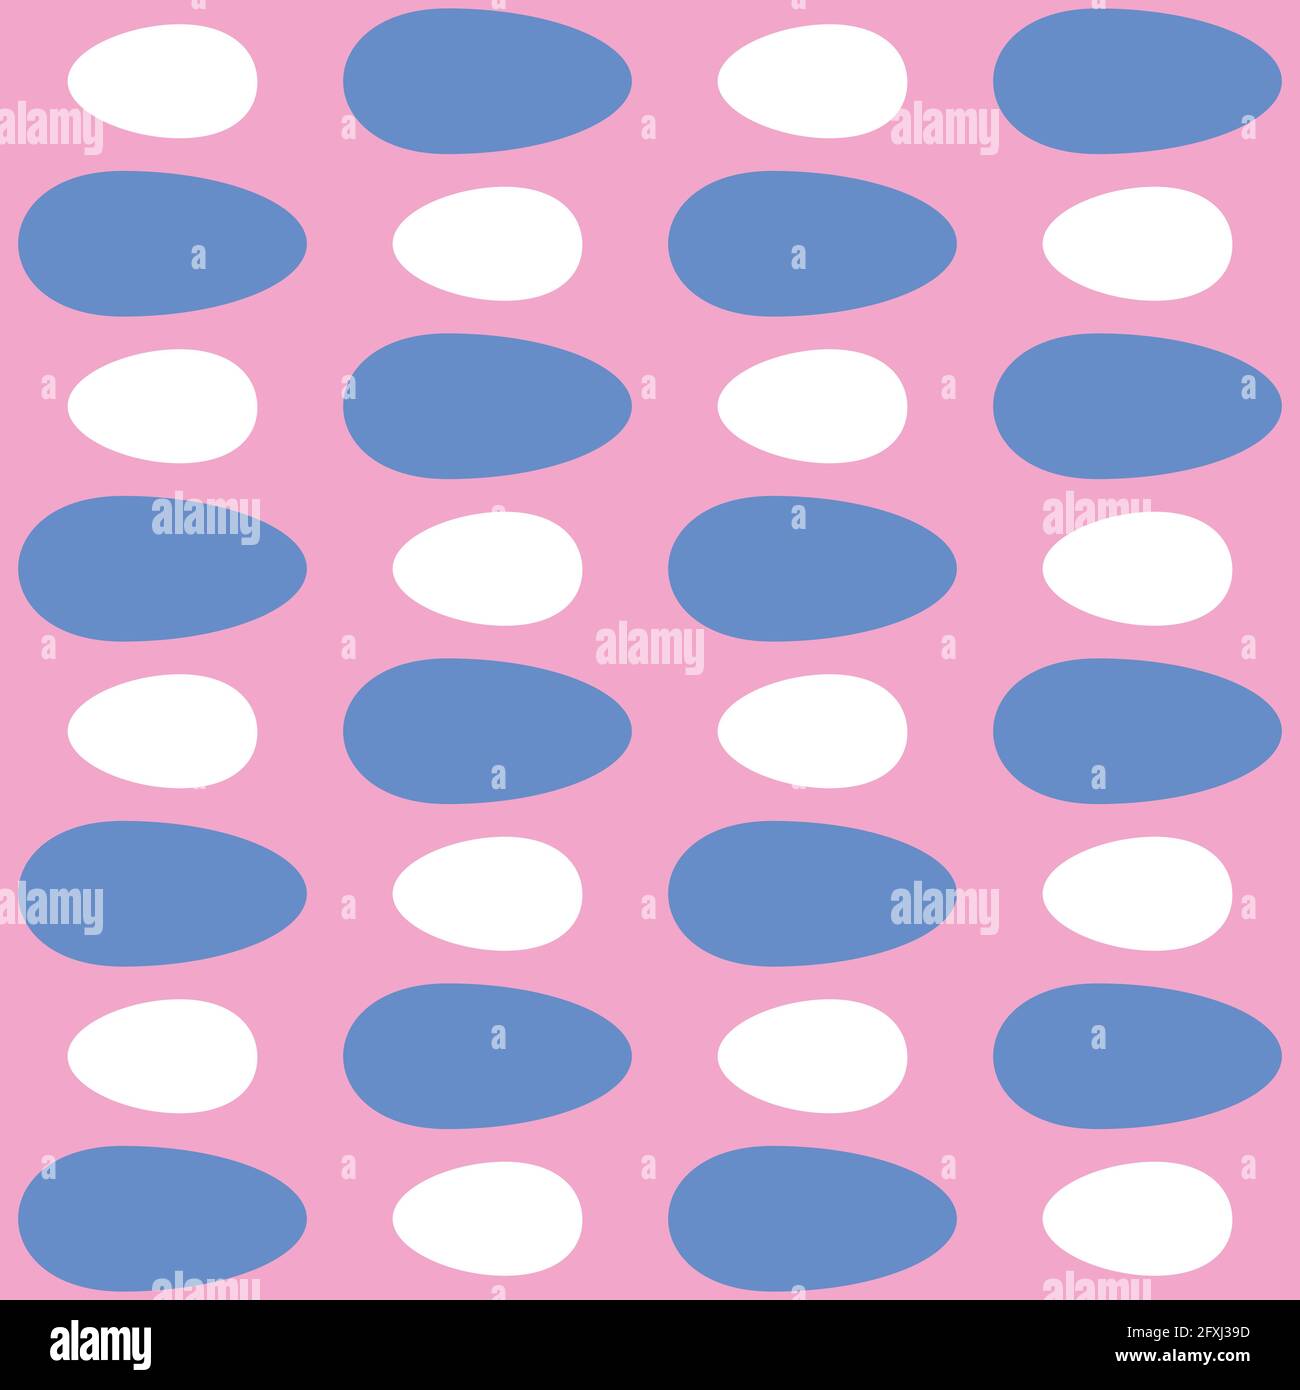 Simple retro seamless pattern for web, advertising, textiles, prints and any design projects. Rounded shapes will decorate any surface or thing and ma Stock Vector